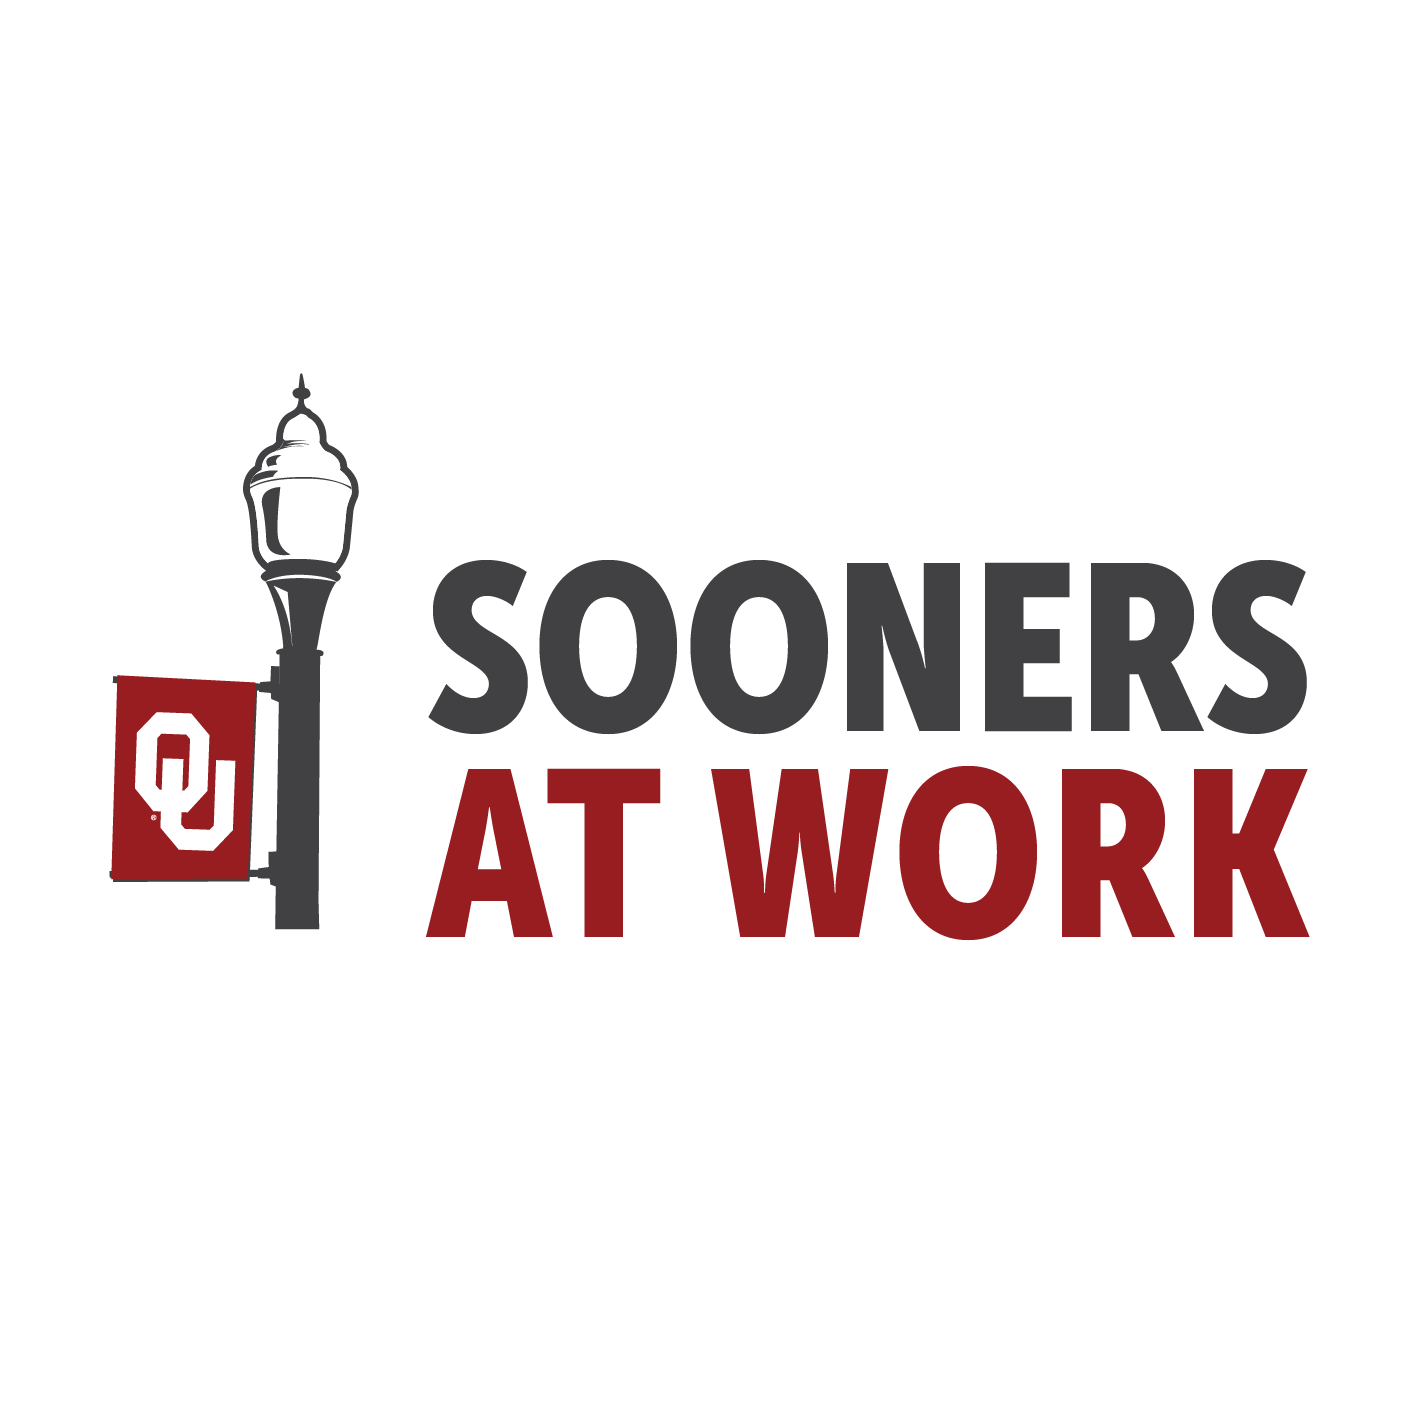 A place for University of Oklahoma employees to connect, stay updated, get tips and information, and win prizes by participating in exciting contests.